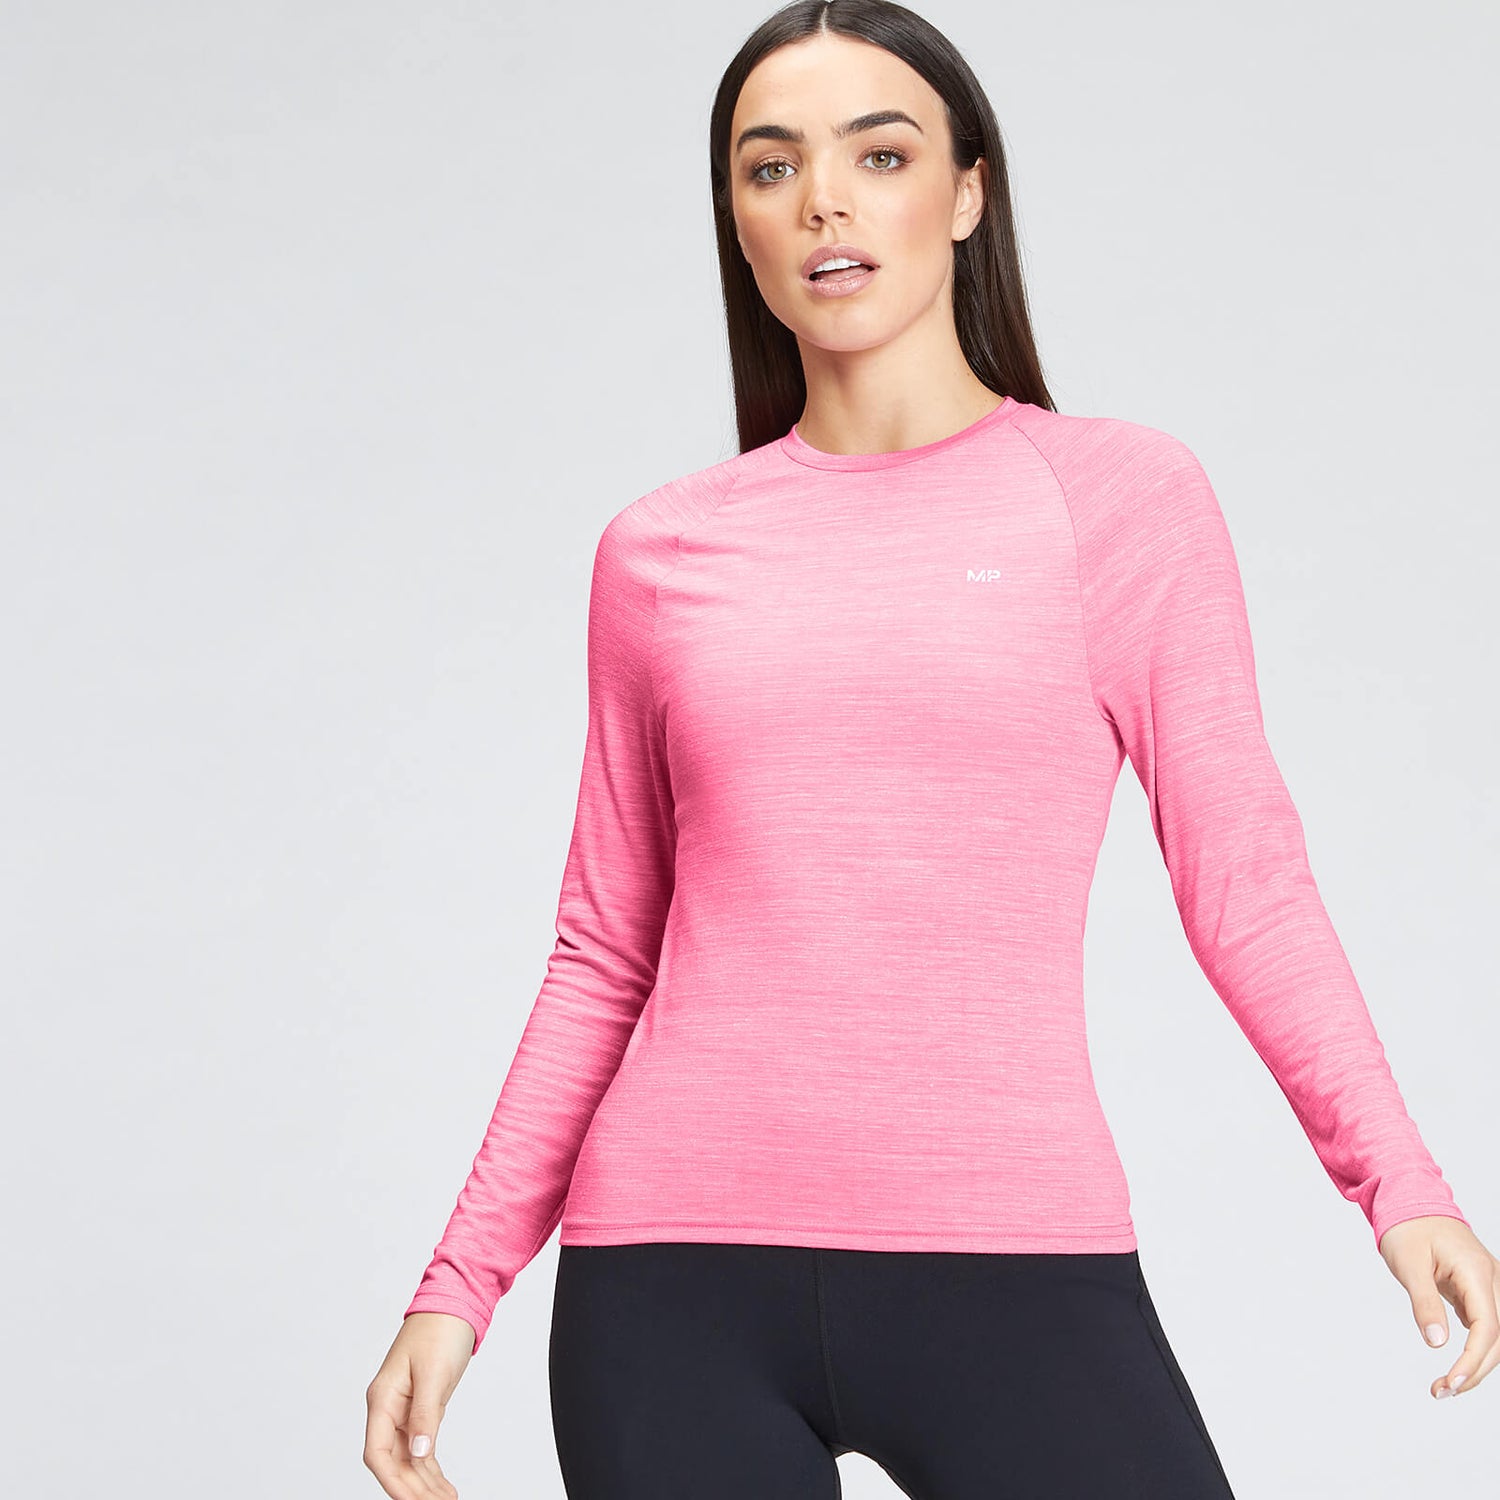 MP Women's Performance Long Sleeve Training T-Shirt - Candyfloss Marl with White Fleck